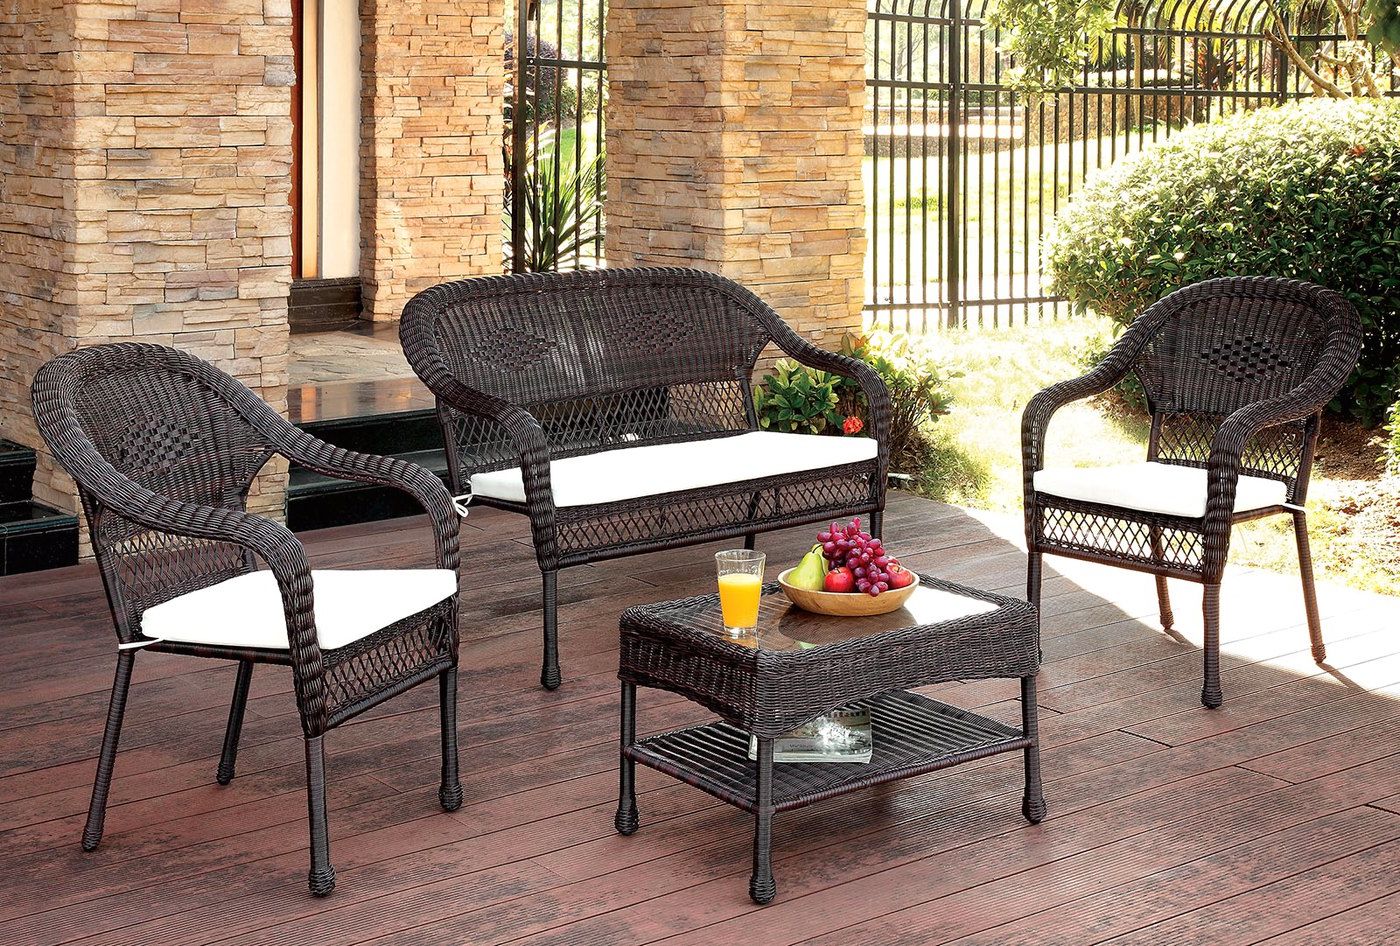 2020 Blue And Brown Wicker Outdoor Patio Sets Throughout Charleston Casual 4 Pc Brown Wicker Patio Seating Set W/ Ivory Cushions (View 2 of 15)